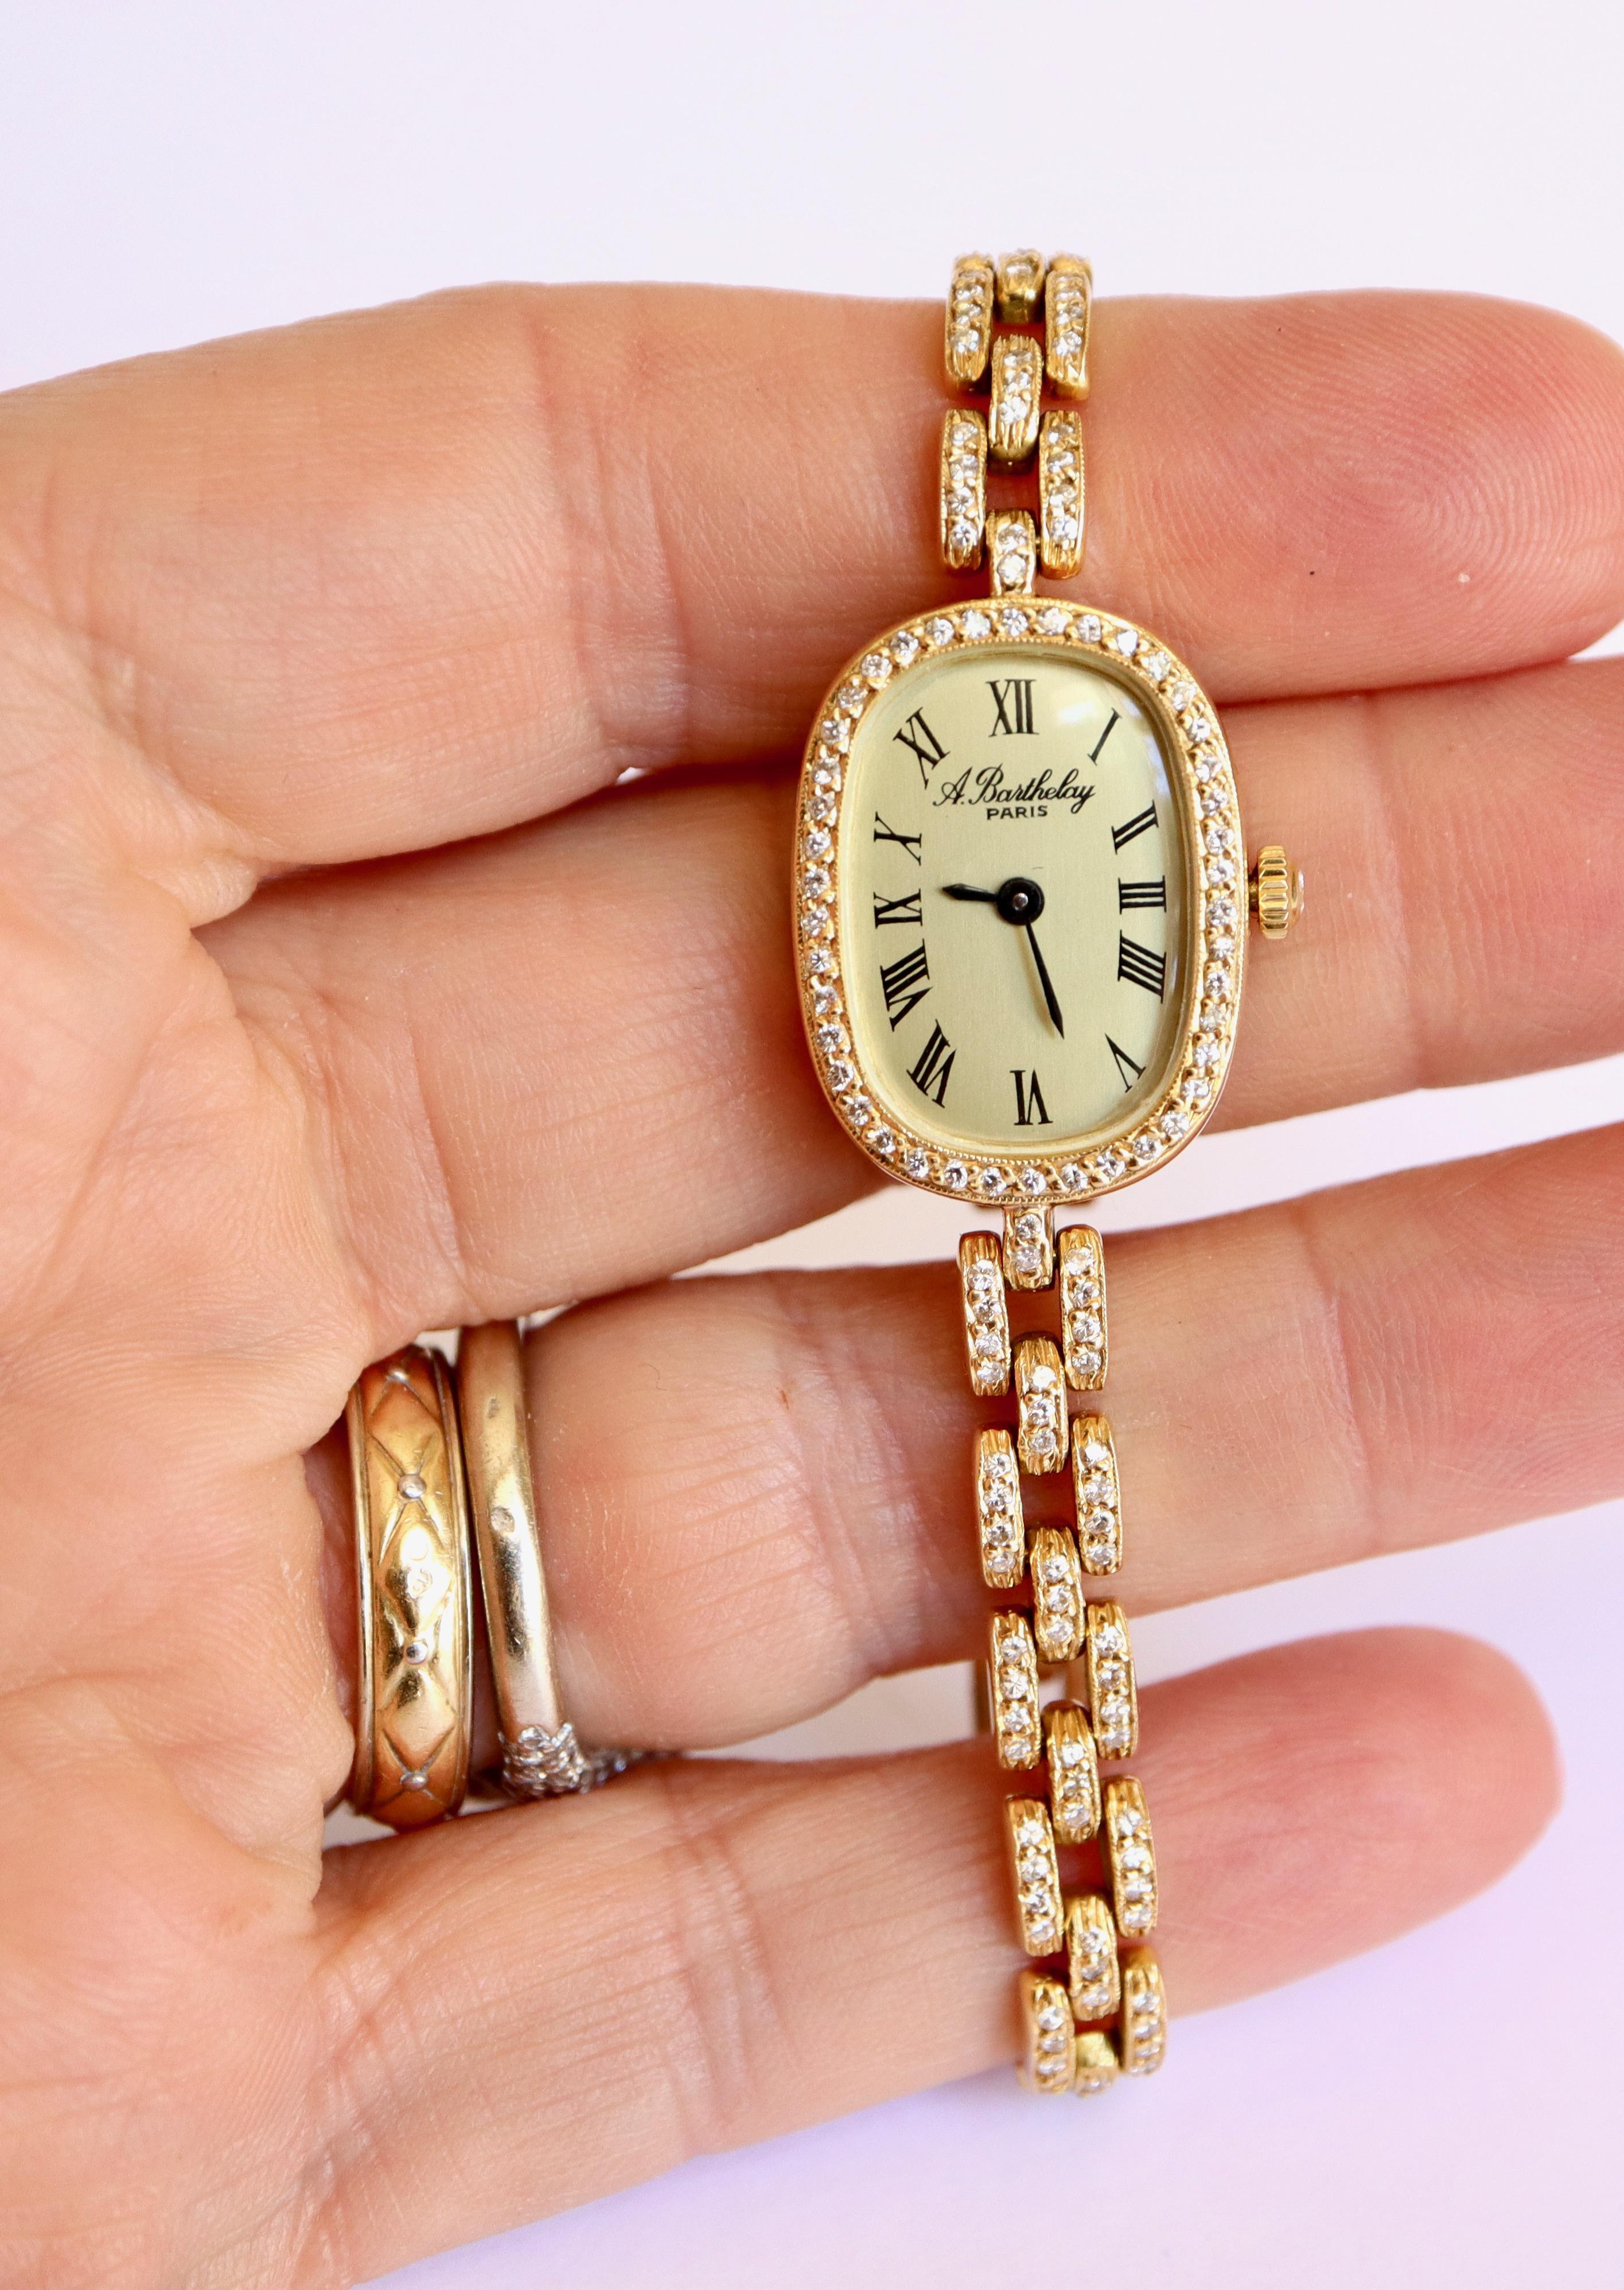 18K Yellow Gold and Diamonds Women's Wrist Watch from Alexis Barthelay.
Rare and very Beautiful Model 
Gross Weight: 33.7 g Length: 16.5 cm 
Bracelet width: 5 mm Dial: 2.3 x 1.8cm
The Bracelet and the Dial of the 18 kt Gold Watch are entirely paved